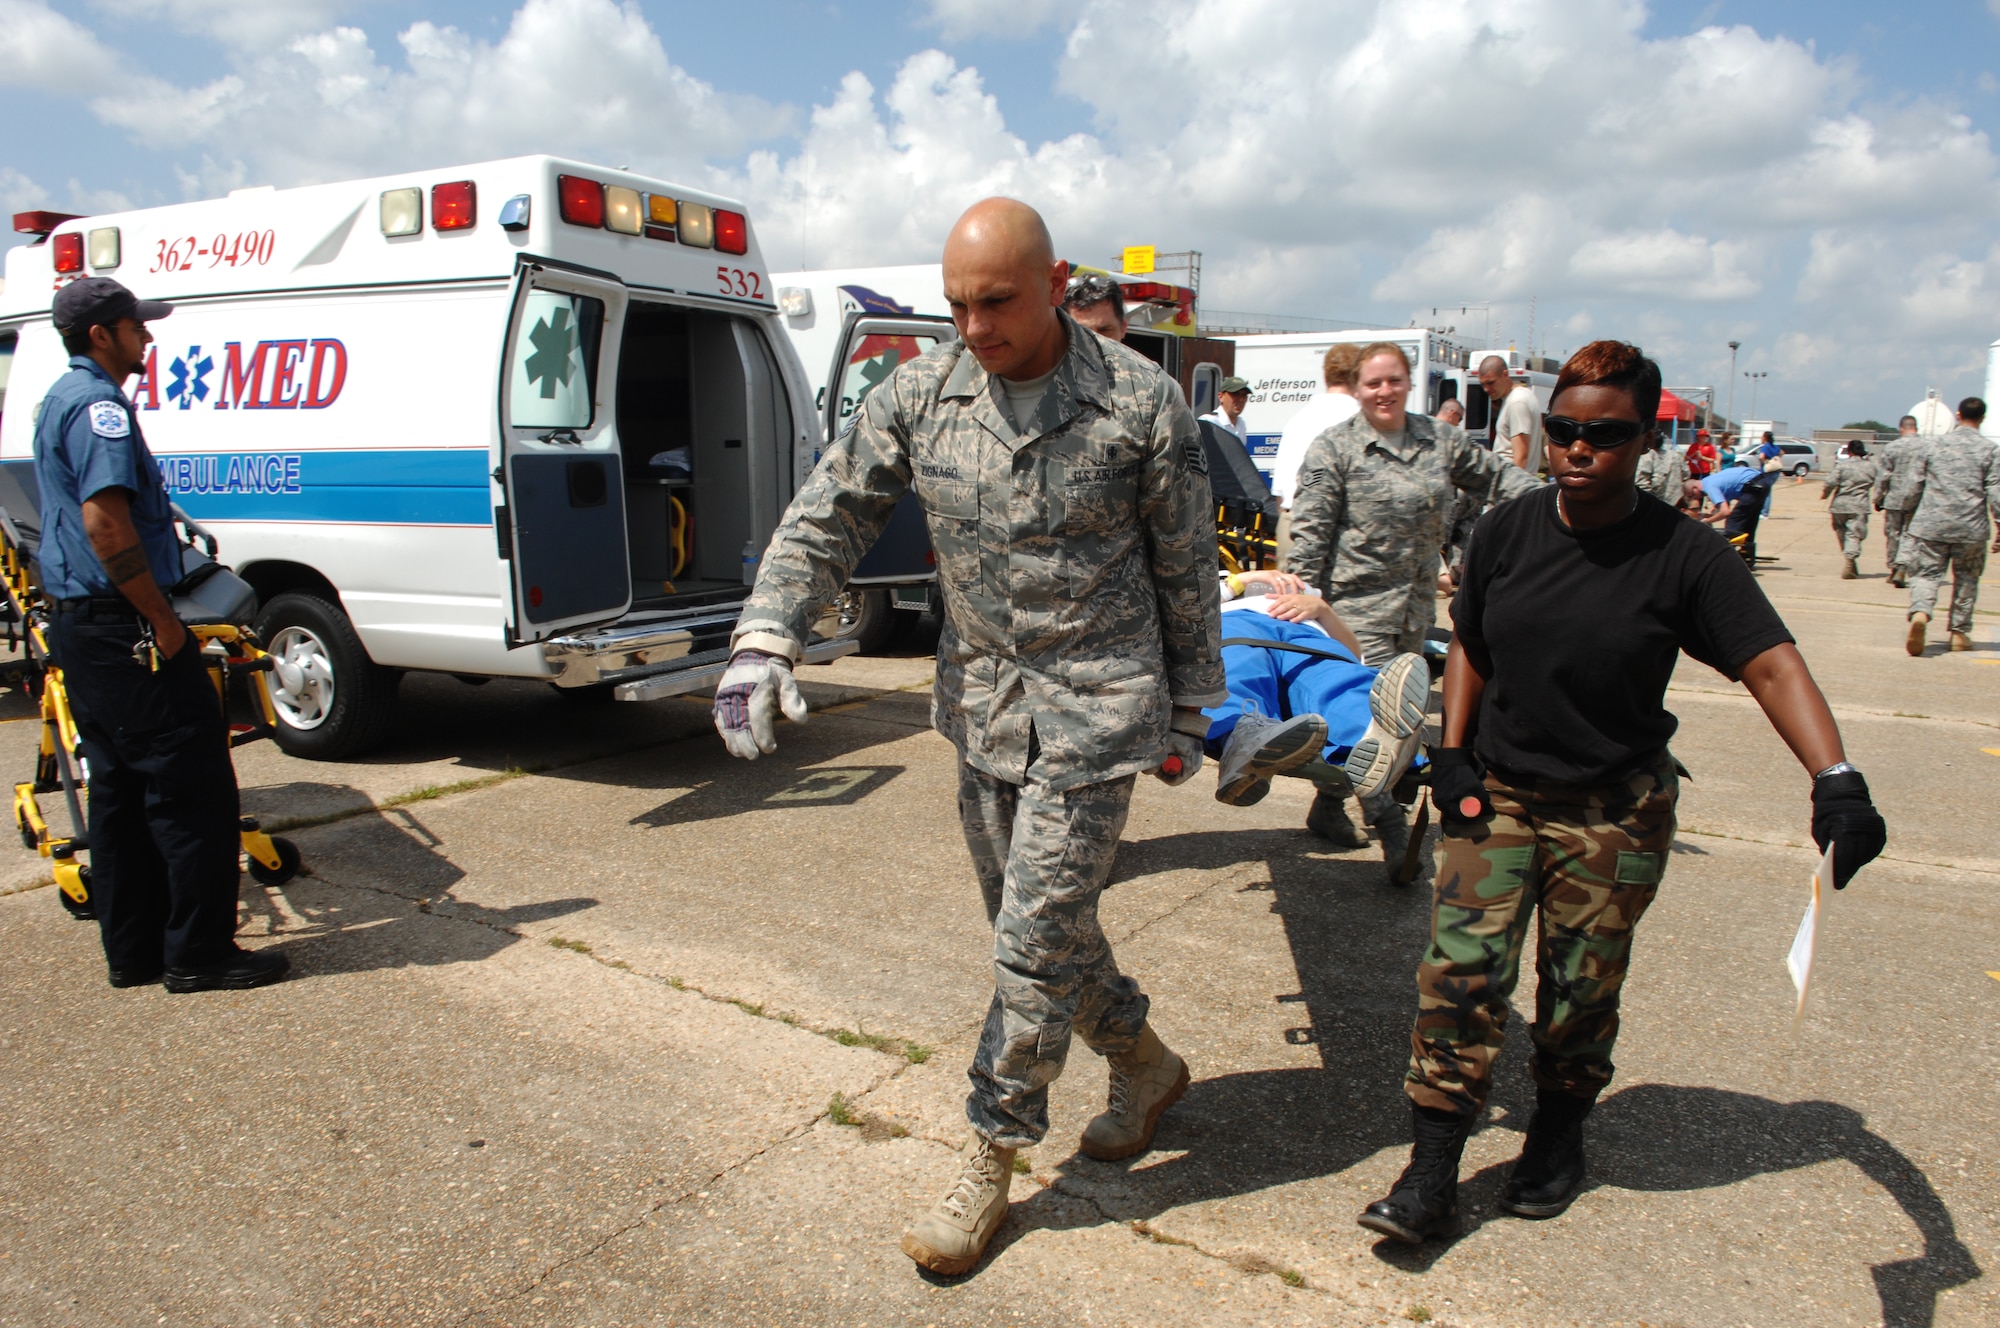 NEW ORLEANS -- Members of the Disaster Aeromedical Staging Facility carry a patient into the facility during an evacuation exercise on the New Orleans Lakefront Airport flighline May 20. The exercise was controlled by the Louisiana Department of Health and Hospitals with the help of multiple military counterparts including Air Mobility Command and U.S. Transportation Command members from Scott AFB. (U.S. Air Force photo by Senior Airman Samantha S. Crane)